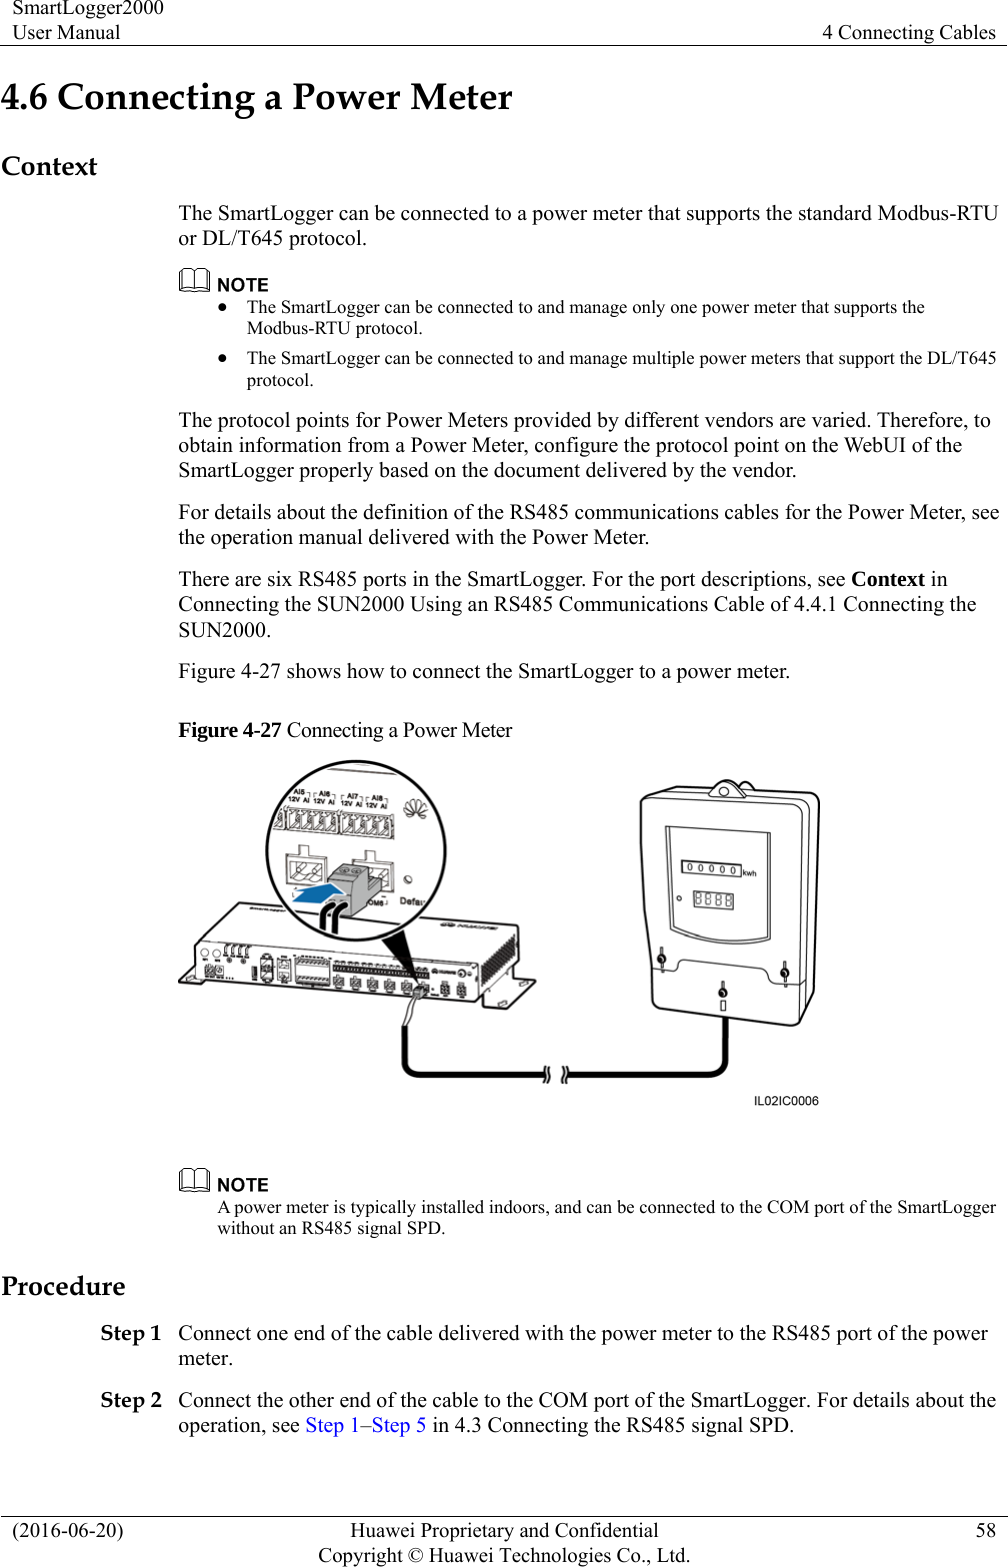 SmartLogger2000 User Manual  4 Connecting Cables (2016-06-20)  Huawei Proprietary and Confidential         Copyright © Huawei Technologies Co., Ltd.58 4.6 Connecting a Power Meter Context The SmartLogger can be connected to a power meter that supports the standard Modbus-RTU or DL/T645 protocol.   The SmartLogger can be connected to and manage only one power meter that supports the Modbus-RTU protocol.    The SmartLogger can be connected to and manage multiple power meters that support the DL/T645 protocol.  The protocol points for Power Meters provided by different vendors are varied. Therefore, to obtain information from a Power Meter, configure the protocol point on the WebUI of the SmartLogger properly based on the document delivered by the vendor. For details about the definition of the RS485 communications cables for the Power Meter, see the operation manual delivered with the Power Meter. There are six RS485 ports in the SmartLogger. For the port descriptions, see Context in Connecting the SUN2000 Using an RS485 Communications Cable of 4.4.1 Connecting the SUN2000. Figure 4-27 shows how to connect the SmartLogger to a power meter. Figure 4-27 Connecting a Power Meter    A power meter is typically installed indoors, and can be connected to the COM port of the SmartLogger without an RS485 signal SPD. Procedure Step 1 Connect one end of the cable delivered with the power meter to the RS485 port of the power meter.  Step 2 Connect the other end of the cable to the COM port of the SmartLogger. For details about the operation, see Step 1–Step 5 in 4.3 Connecting the RS485 signal SPD. 